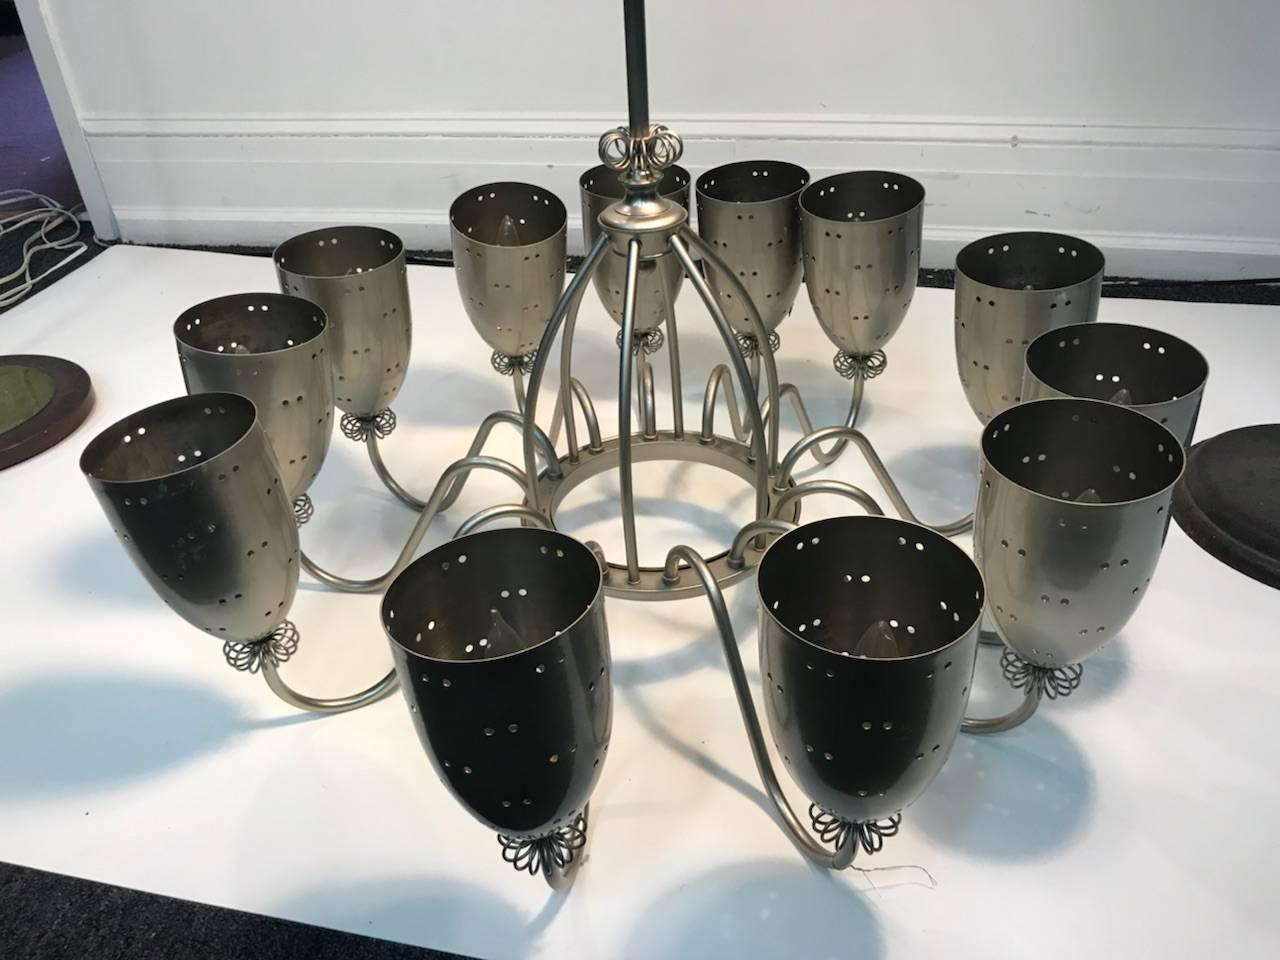 Modern 12 pierced design cup form satin nickel chandelier designed in a midcentury manner with 12 light fixtures. Designed with graceful arms and wire cluster collars and circular form centre.